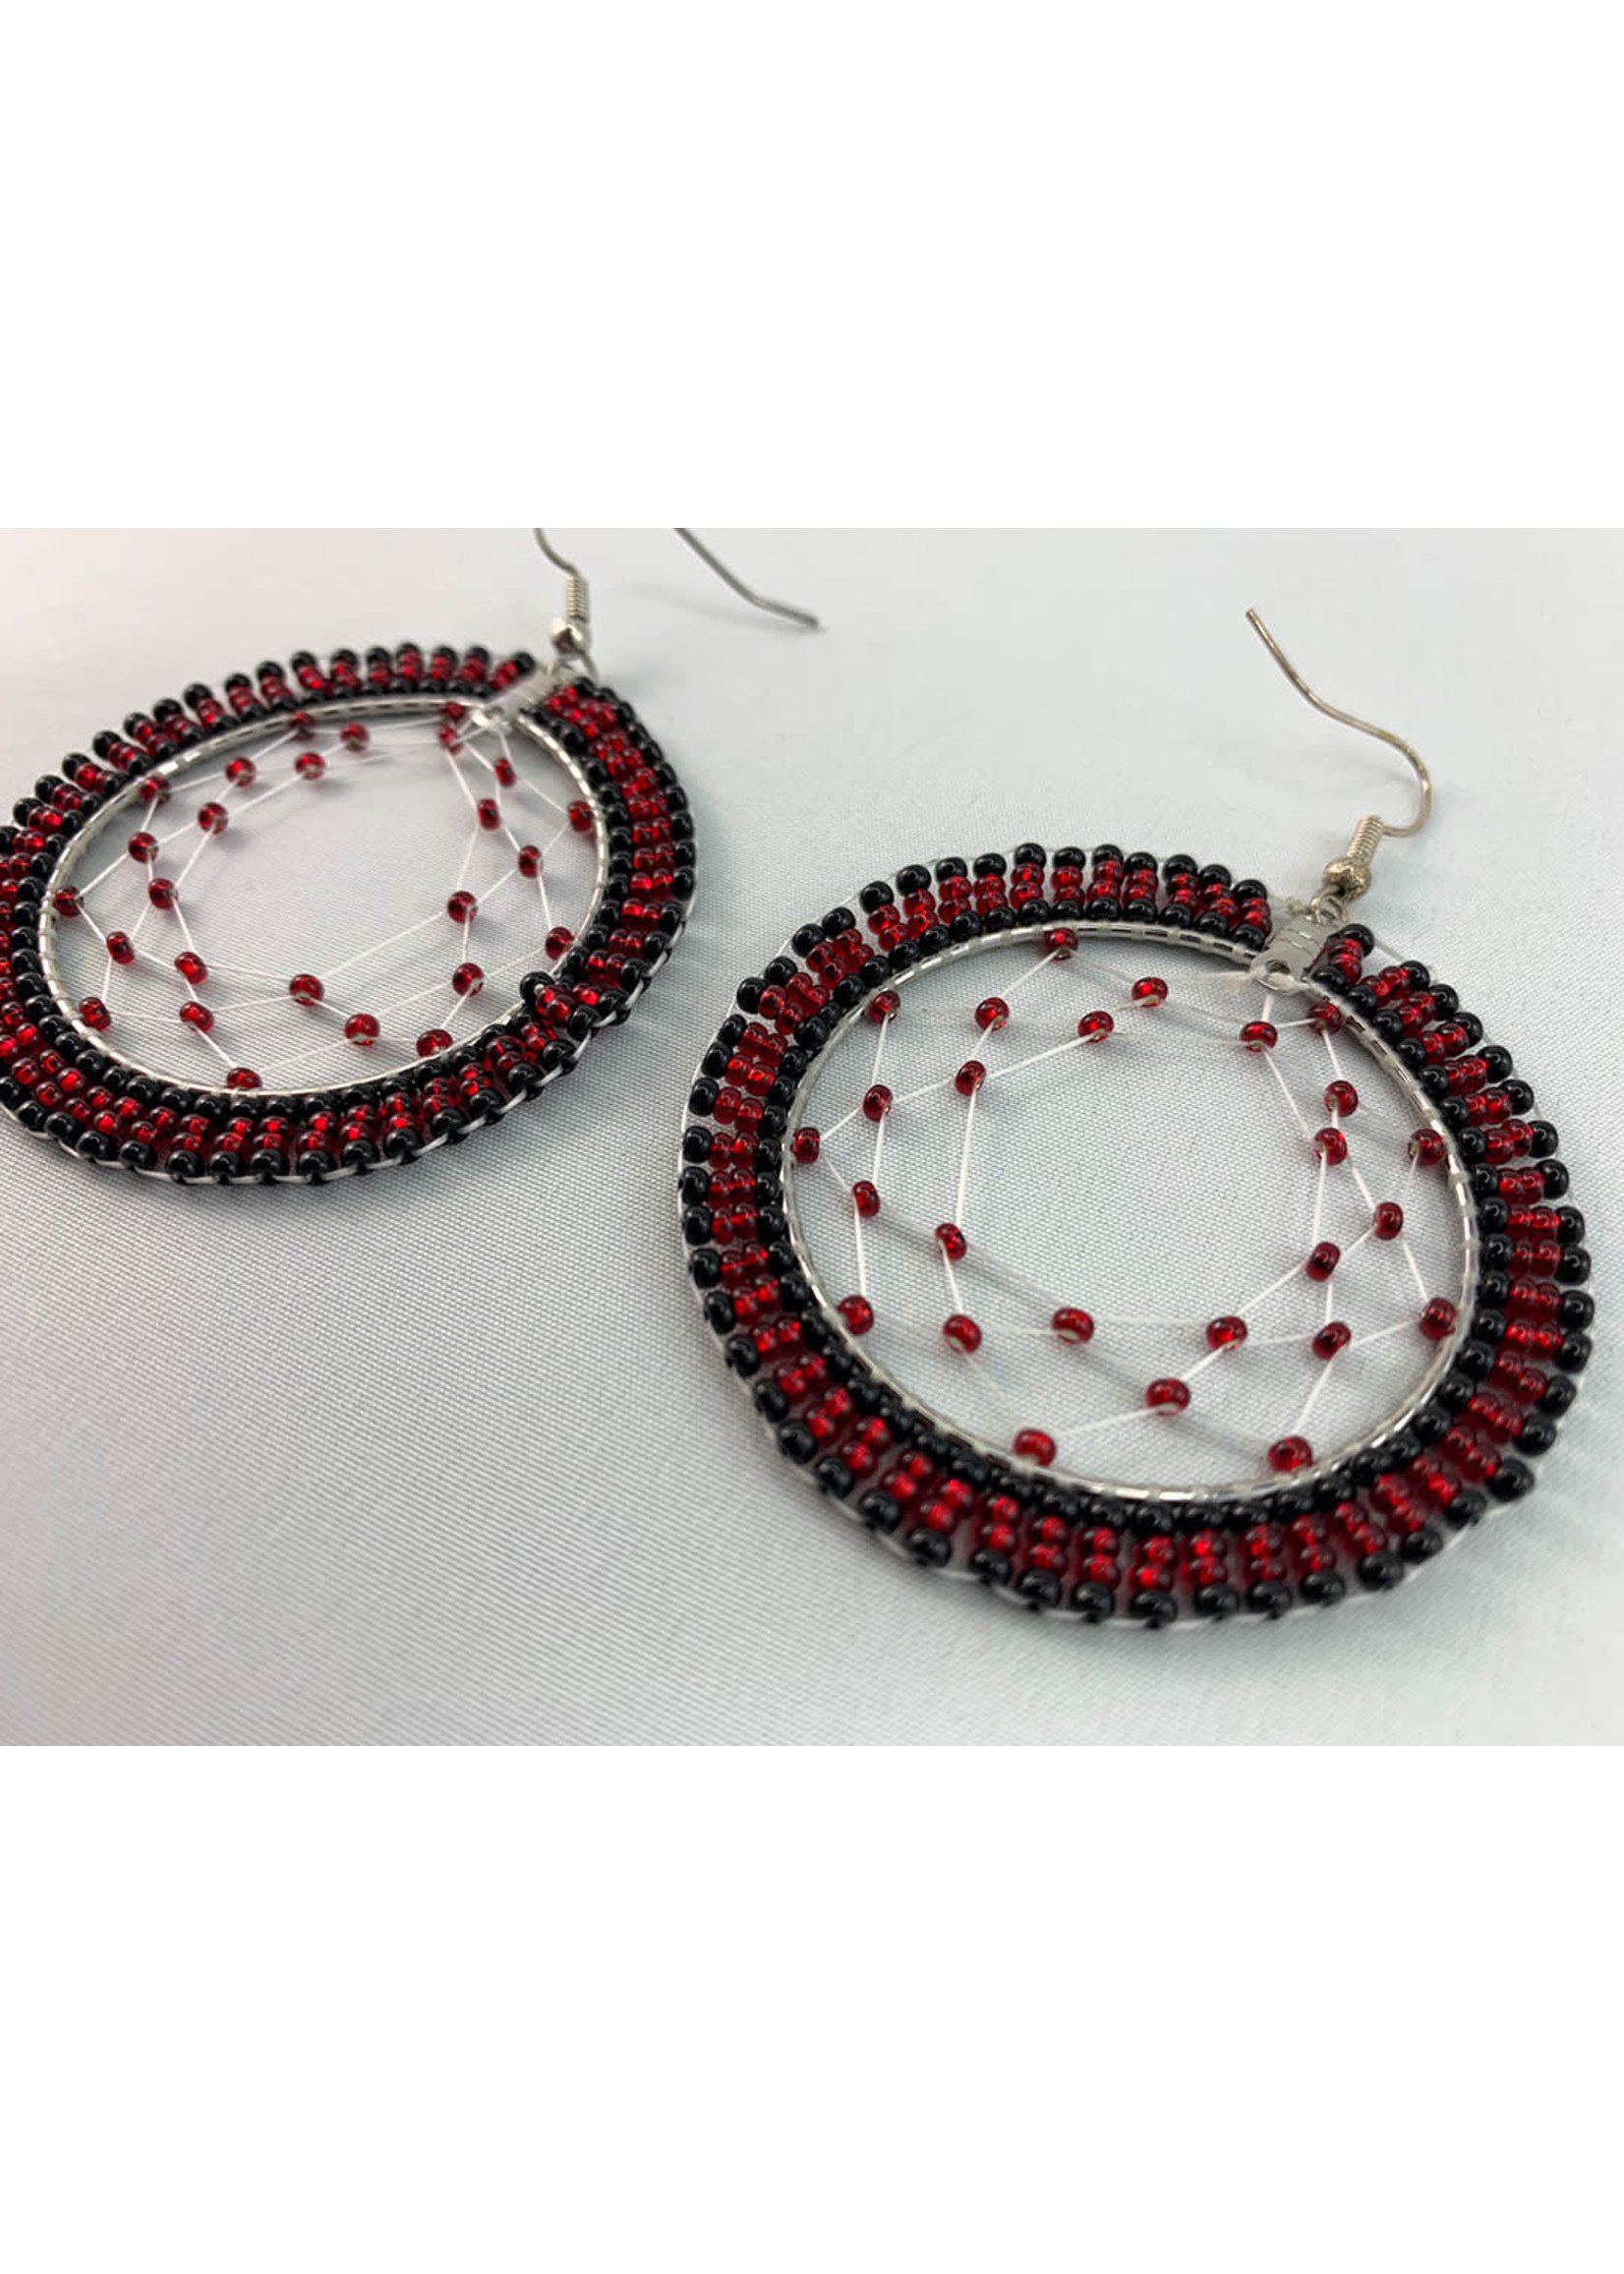 Circle of Eagles Beaded Earrings Dreamcatcher Hoops Silver Lined Red and Black